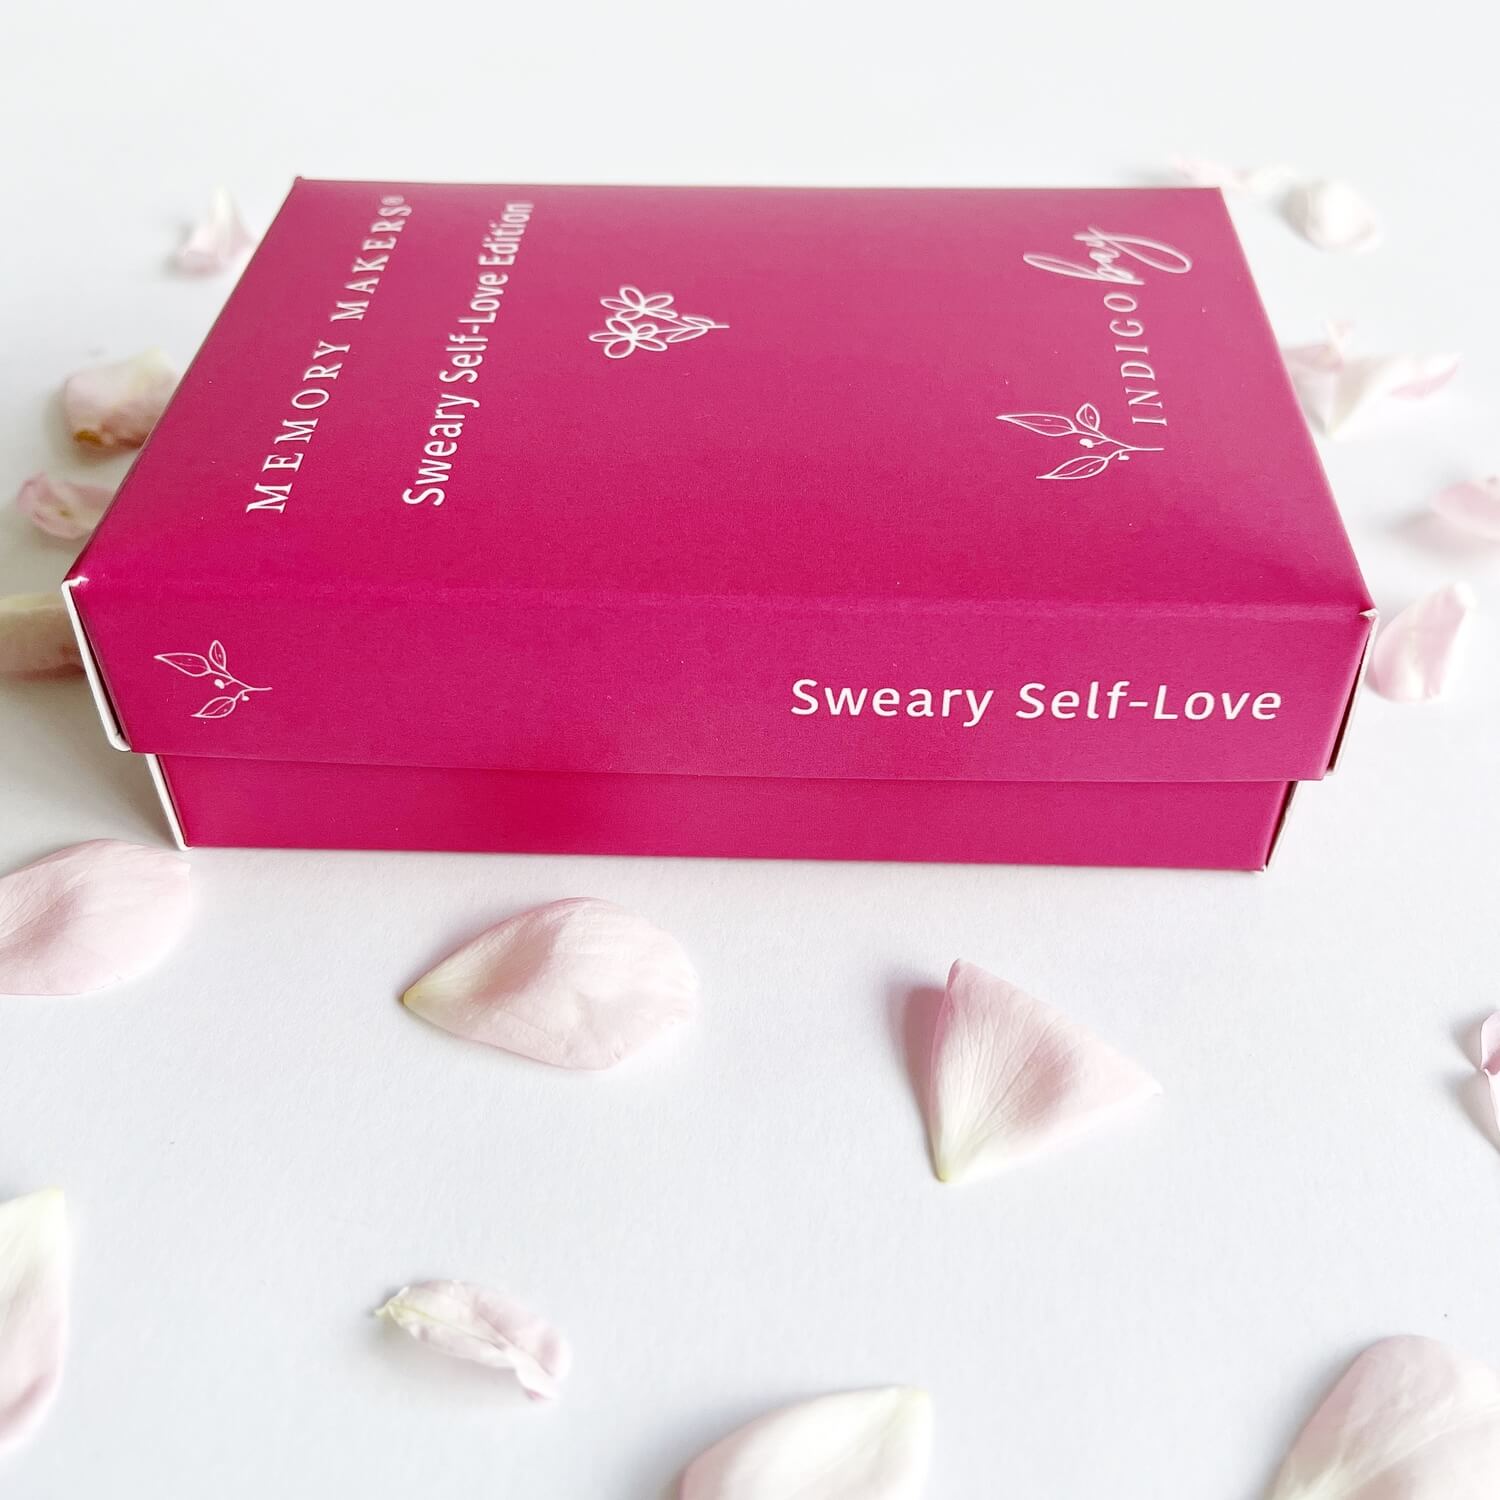 Memory Makers Sweary Self-Love Edition